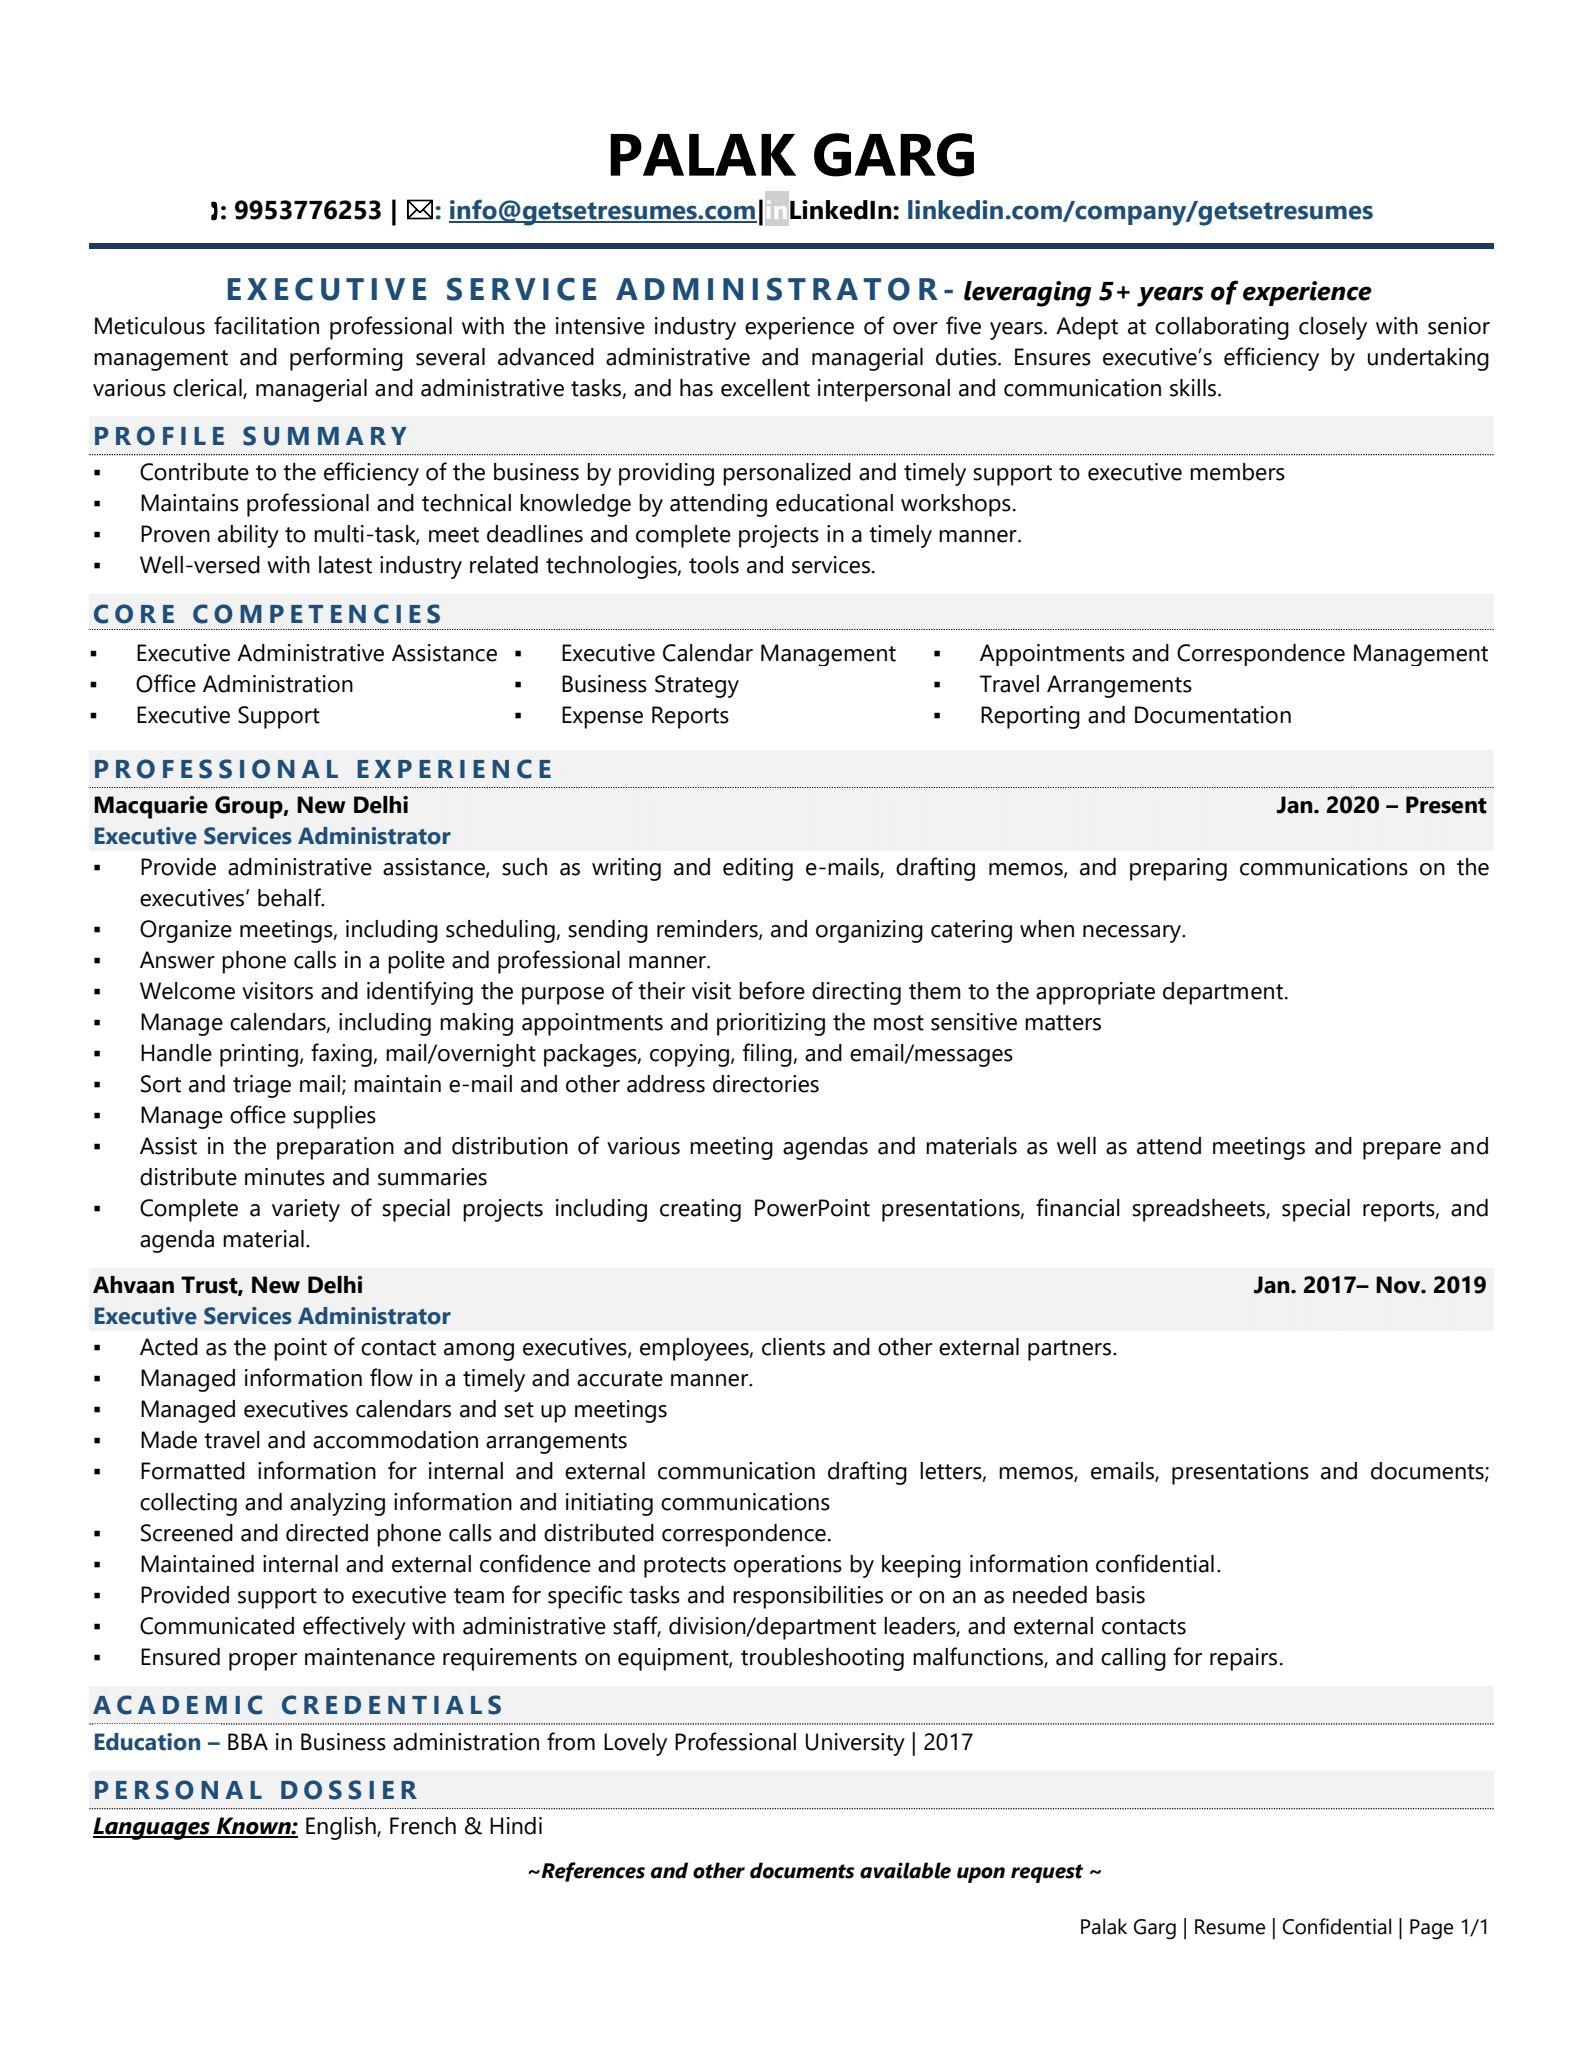 Executive Services Administrator - Resume Example & Template